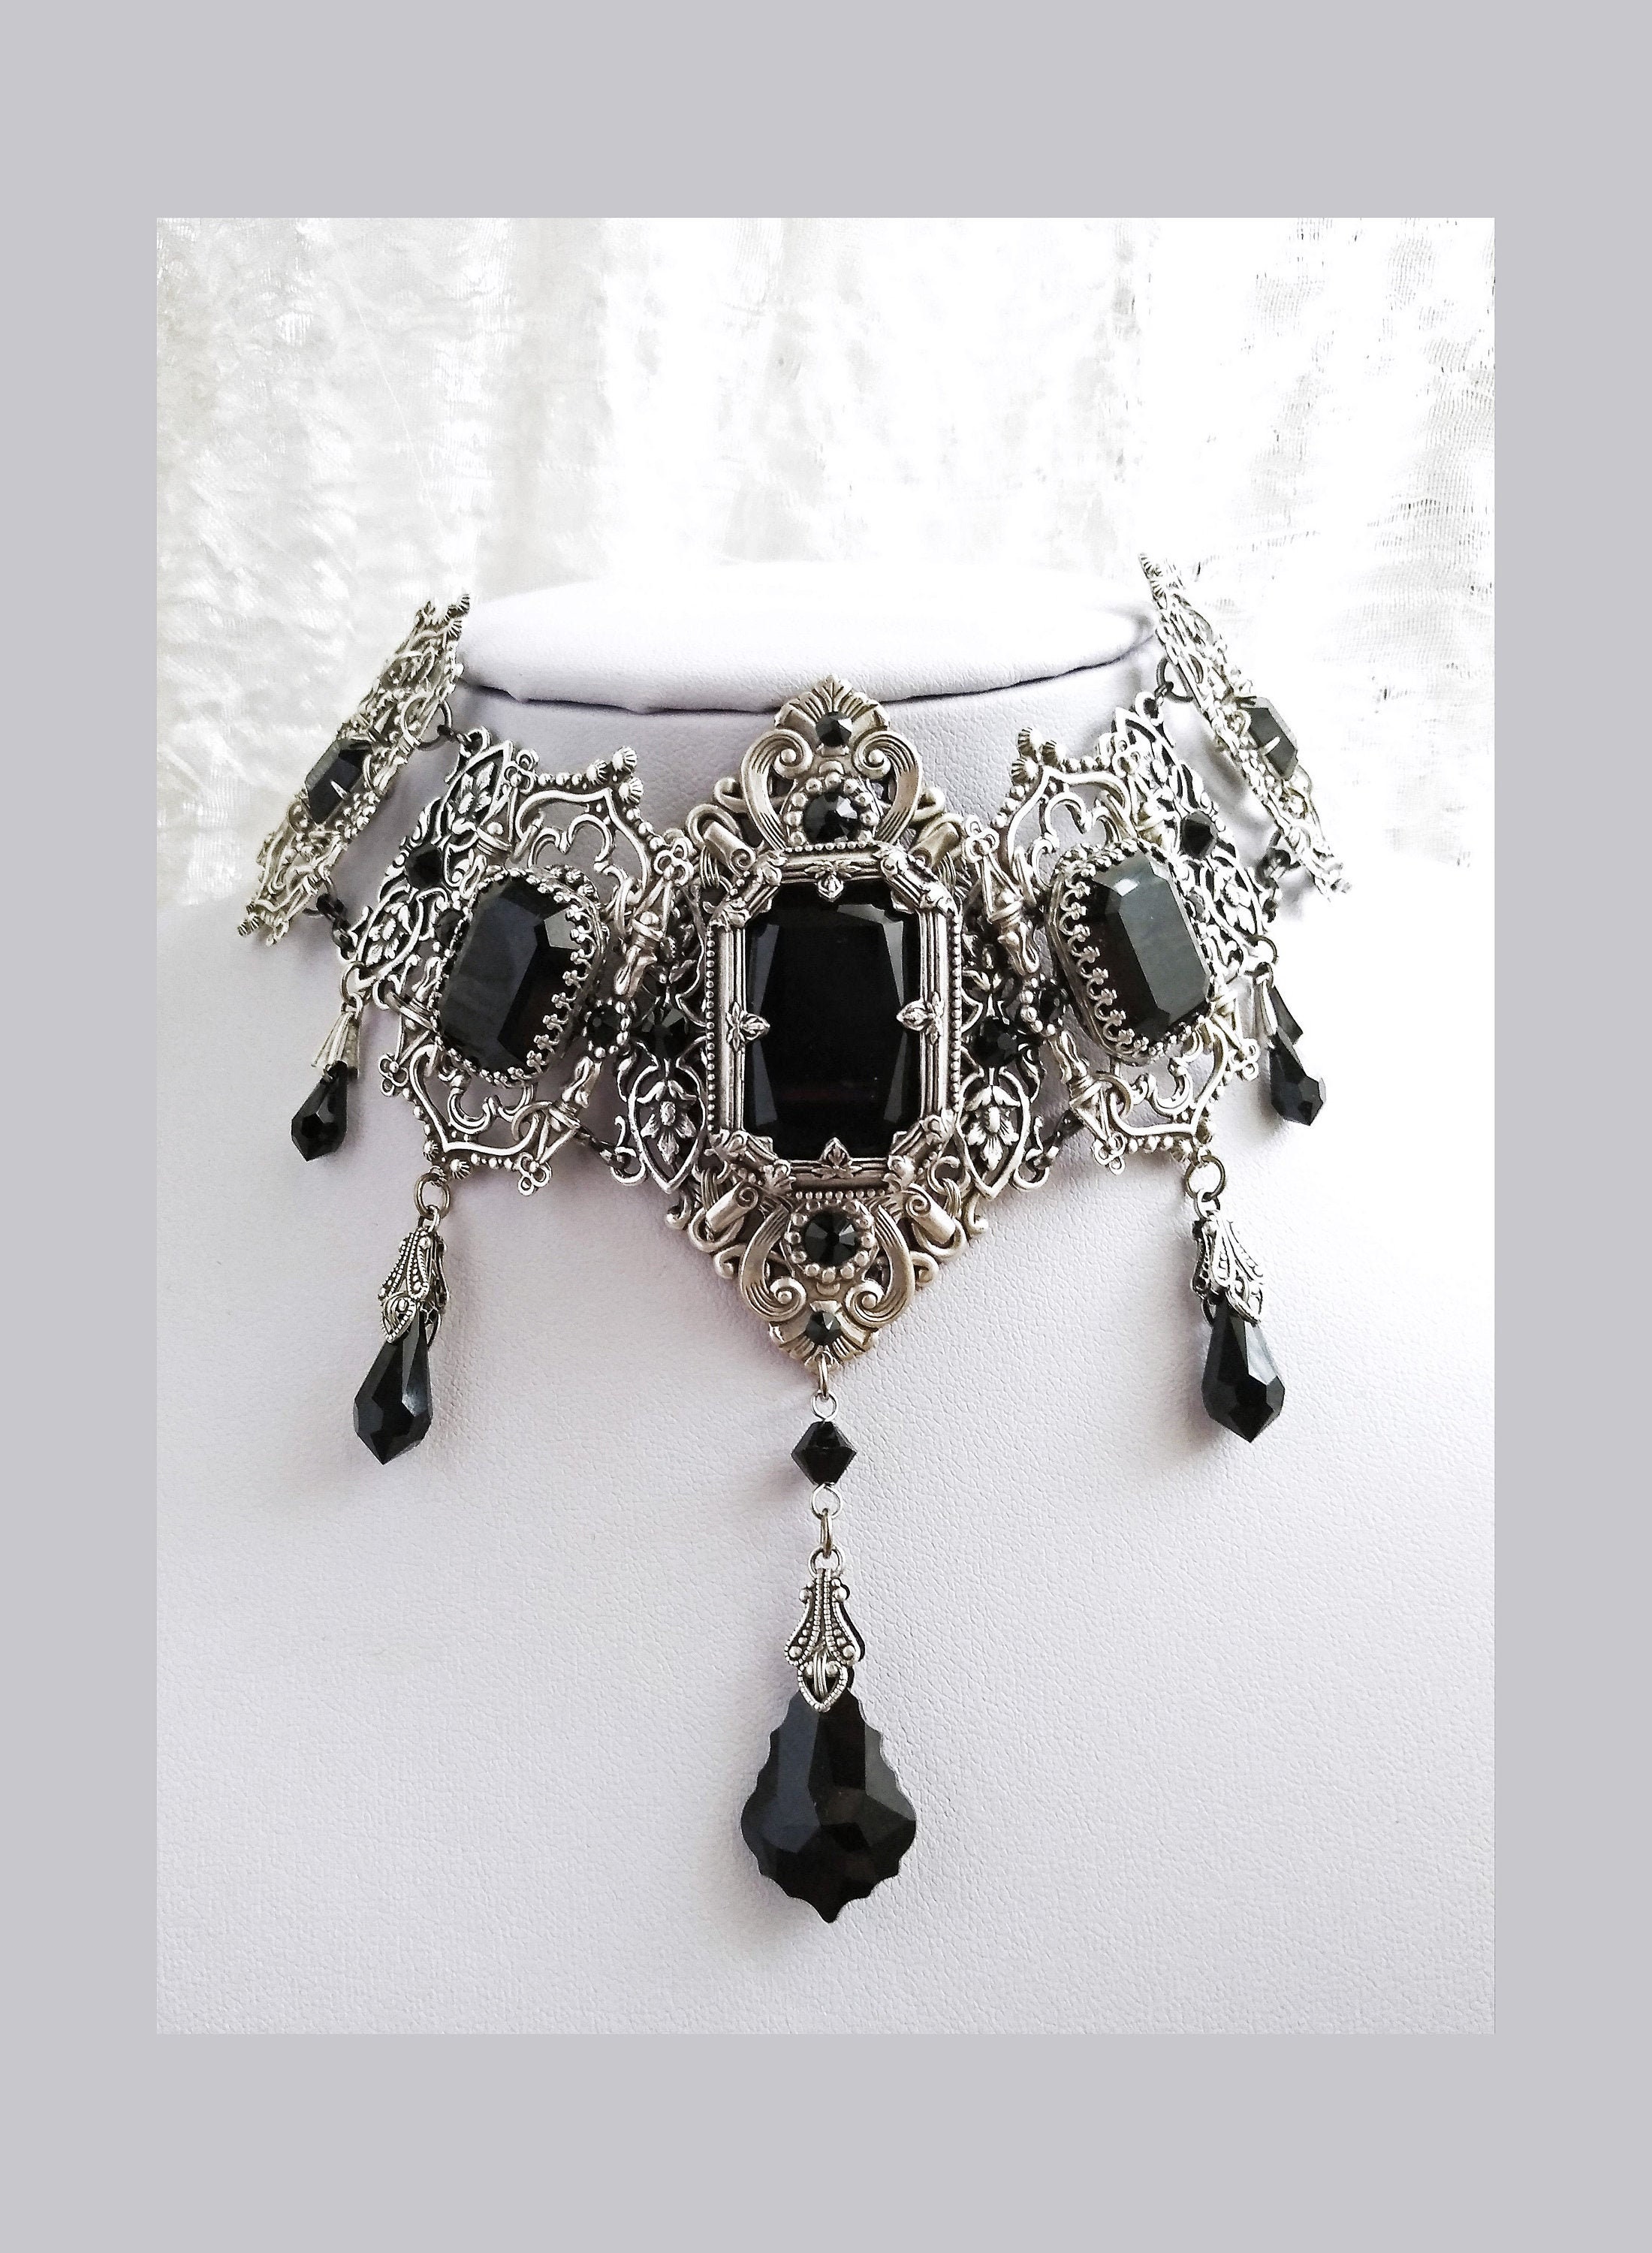 Gothic Victorian Necklace Choker Medieval Renaissance Silver Jewelry Steampunk 